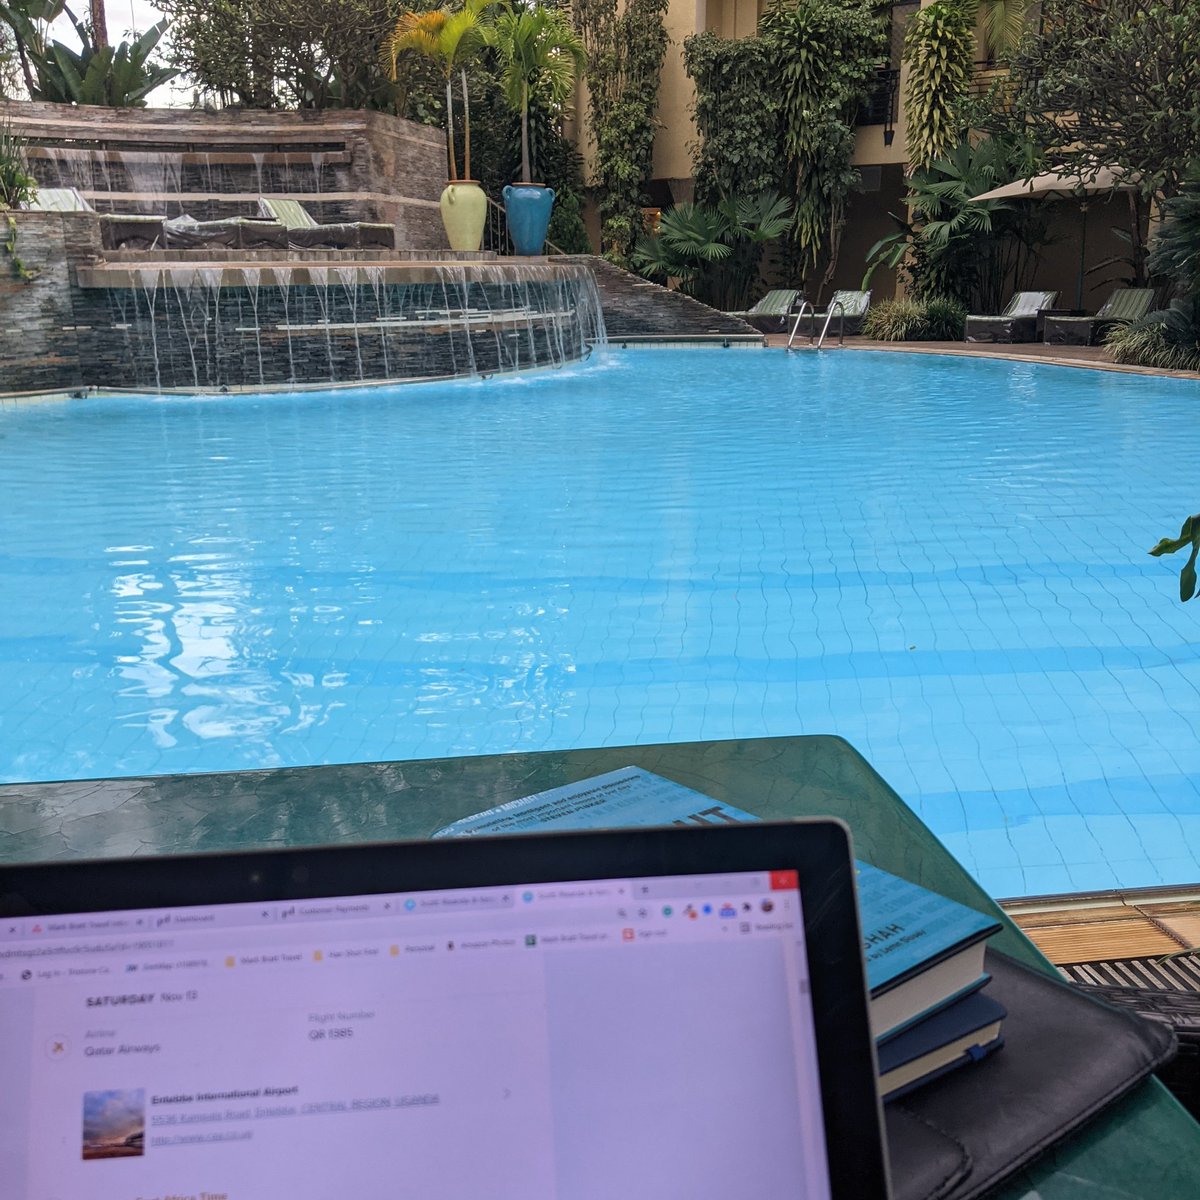 Practicing what we preach with some poolside working from #Kigali #Rwanda. With fast wifi and only a few hours time difference from UK. You really can #workfromthere

#remoteworking #remoteoffice #digitalnomad #workfromanywhere